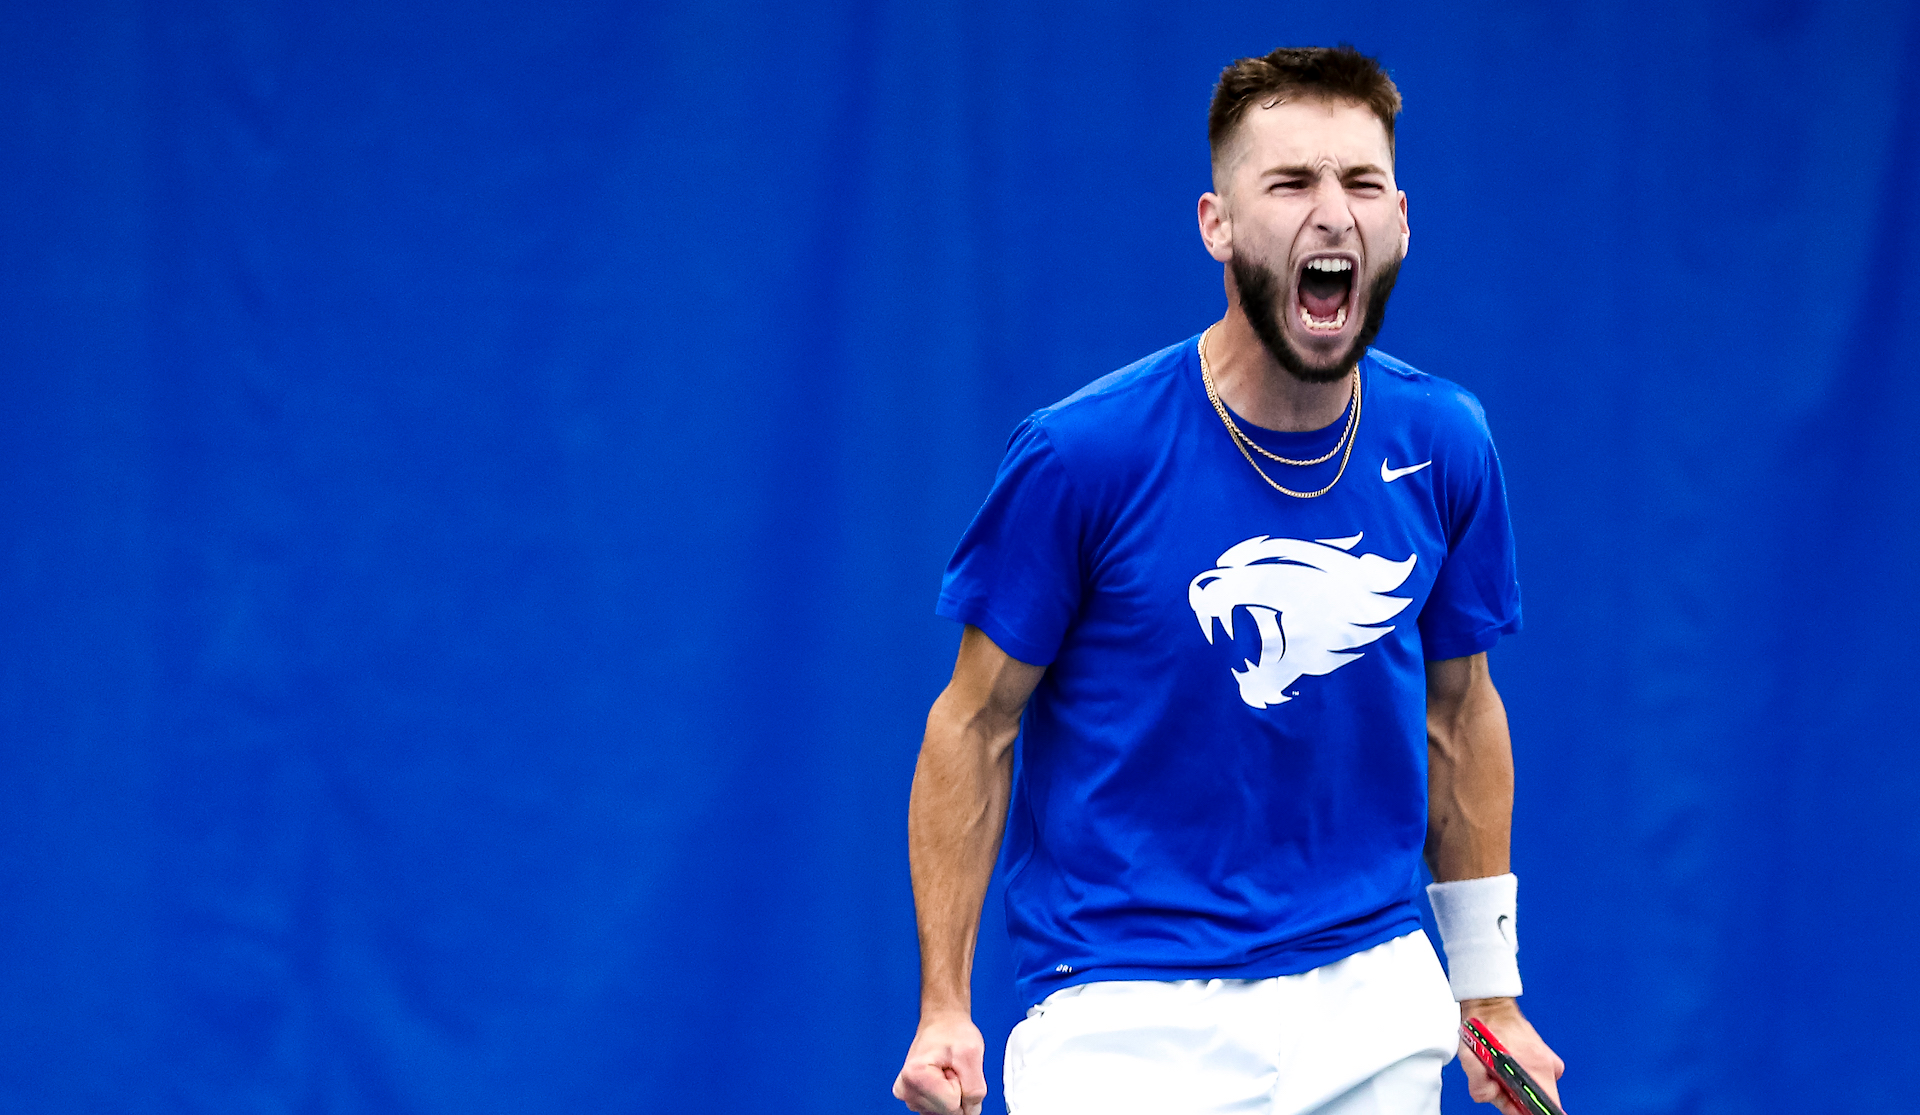 Joshua Lapadat Picks up Clinching Win in No. 12 UK’s Home Victory Over No. 5 Tennessee